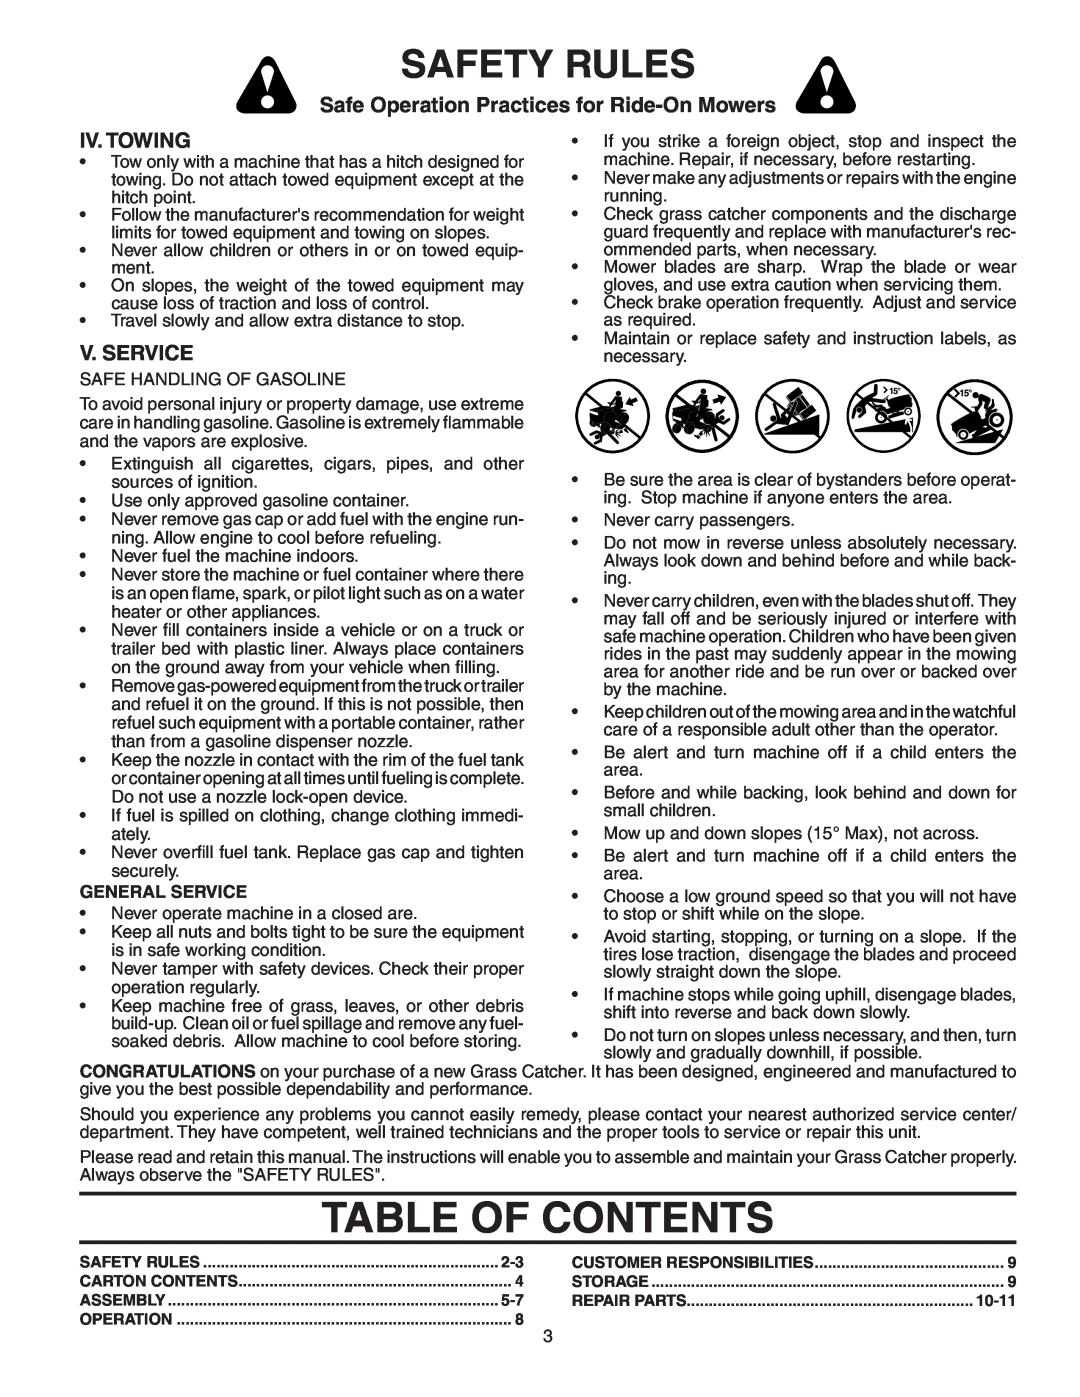 Poulan GTT354 Table Of Contents, Iv. Towing, V. Service, Safety Rules, Safe Operation Practices for Ride-OnMowers 